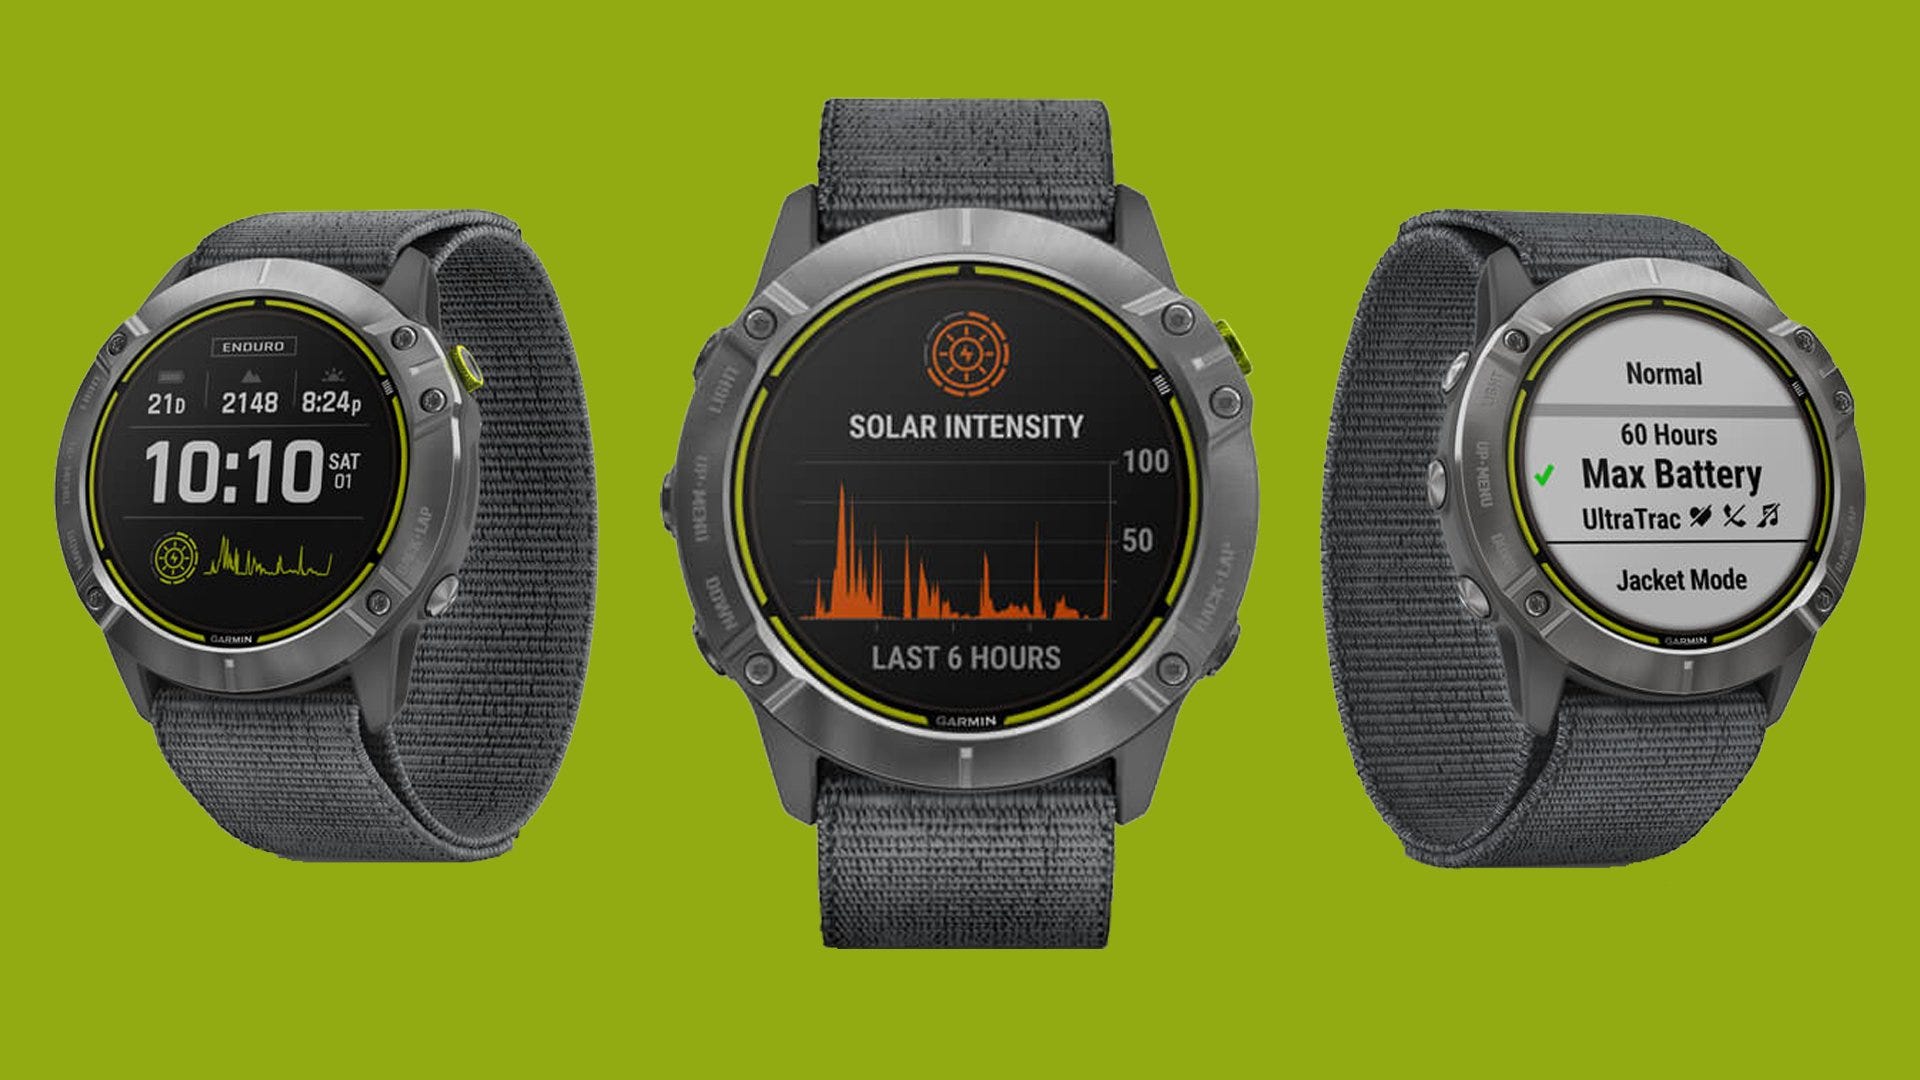 Garmin’s New Enduro Look Has an 80-Hour Battery with Photo voltaic Charging